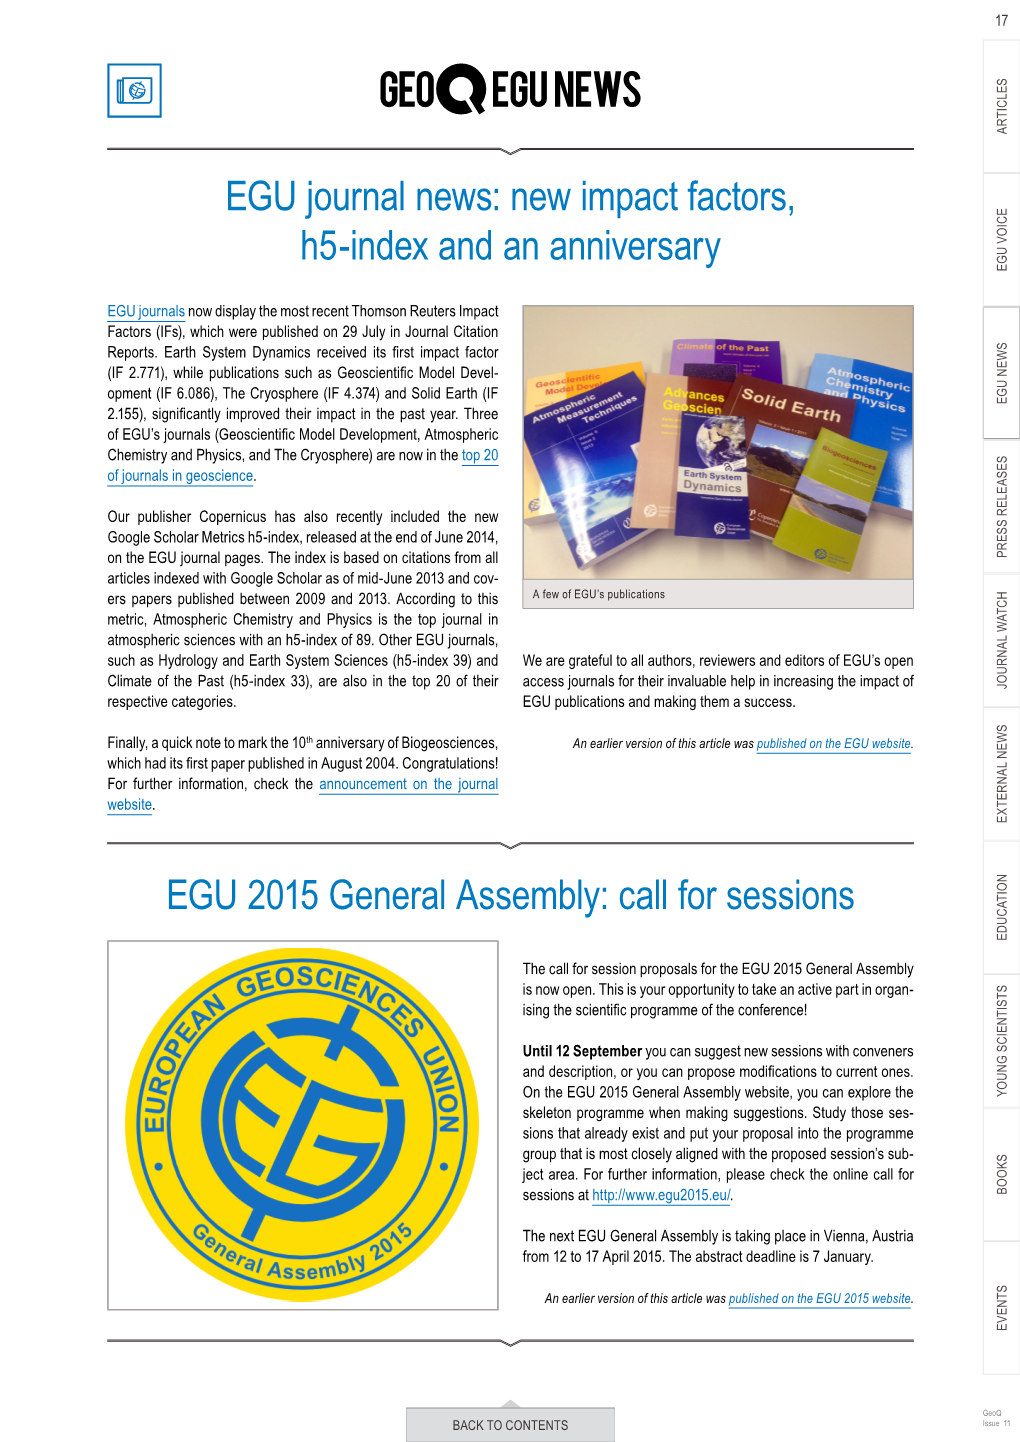 EGU Journal News: New Impact Factors, H5-Index and an Anniversary